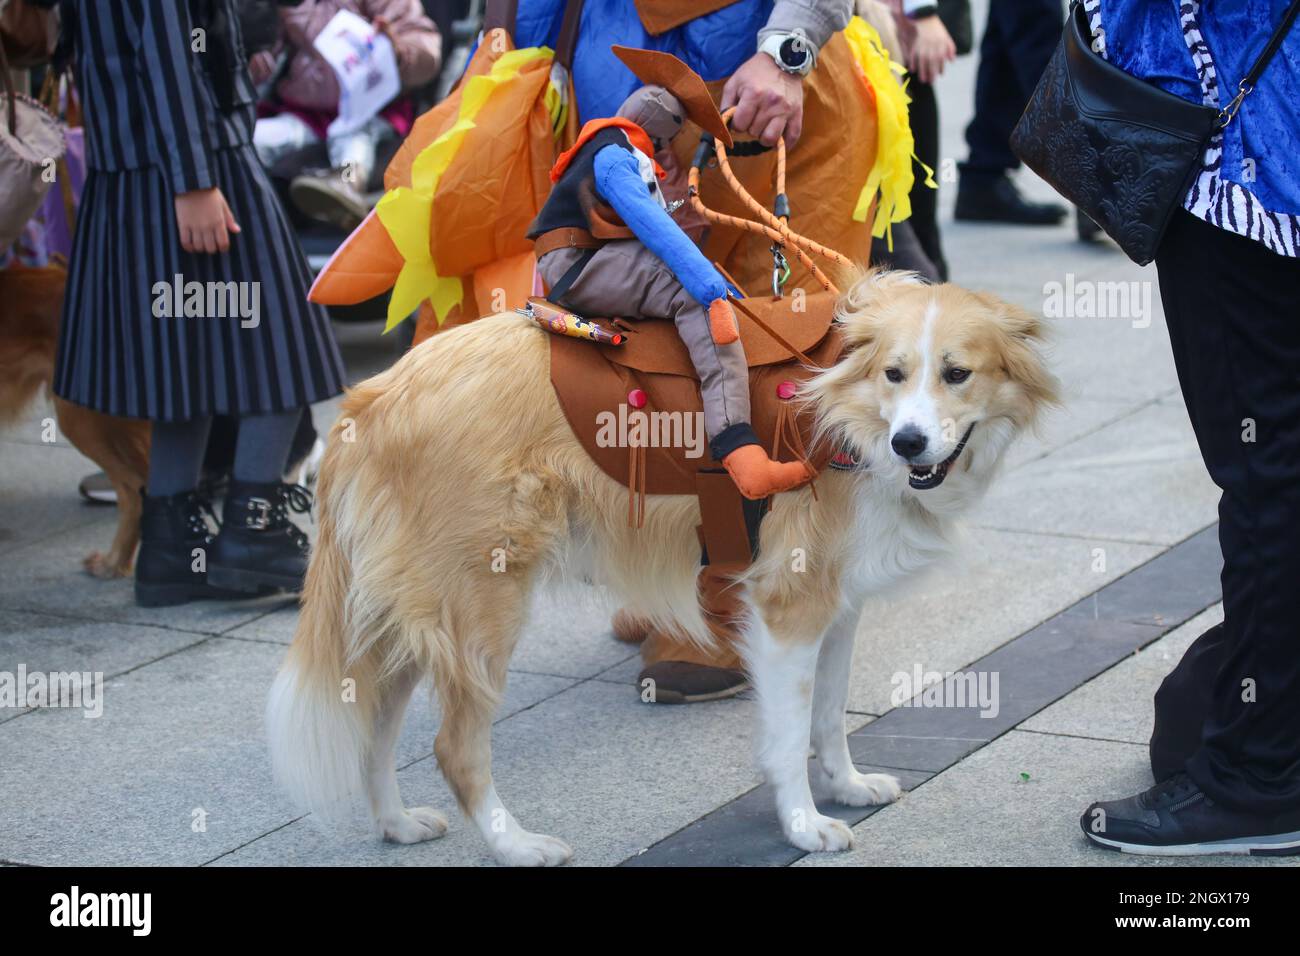 Aviles, Spain, 19th February, 2023: A dog with Woody, one of the Toy Story dolls on its back during the Antroxaes Pet Contest on February 18, 2023, in Aviles, Spain. Credit: Alberto Brevers / Alamy Live News Stock Photo